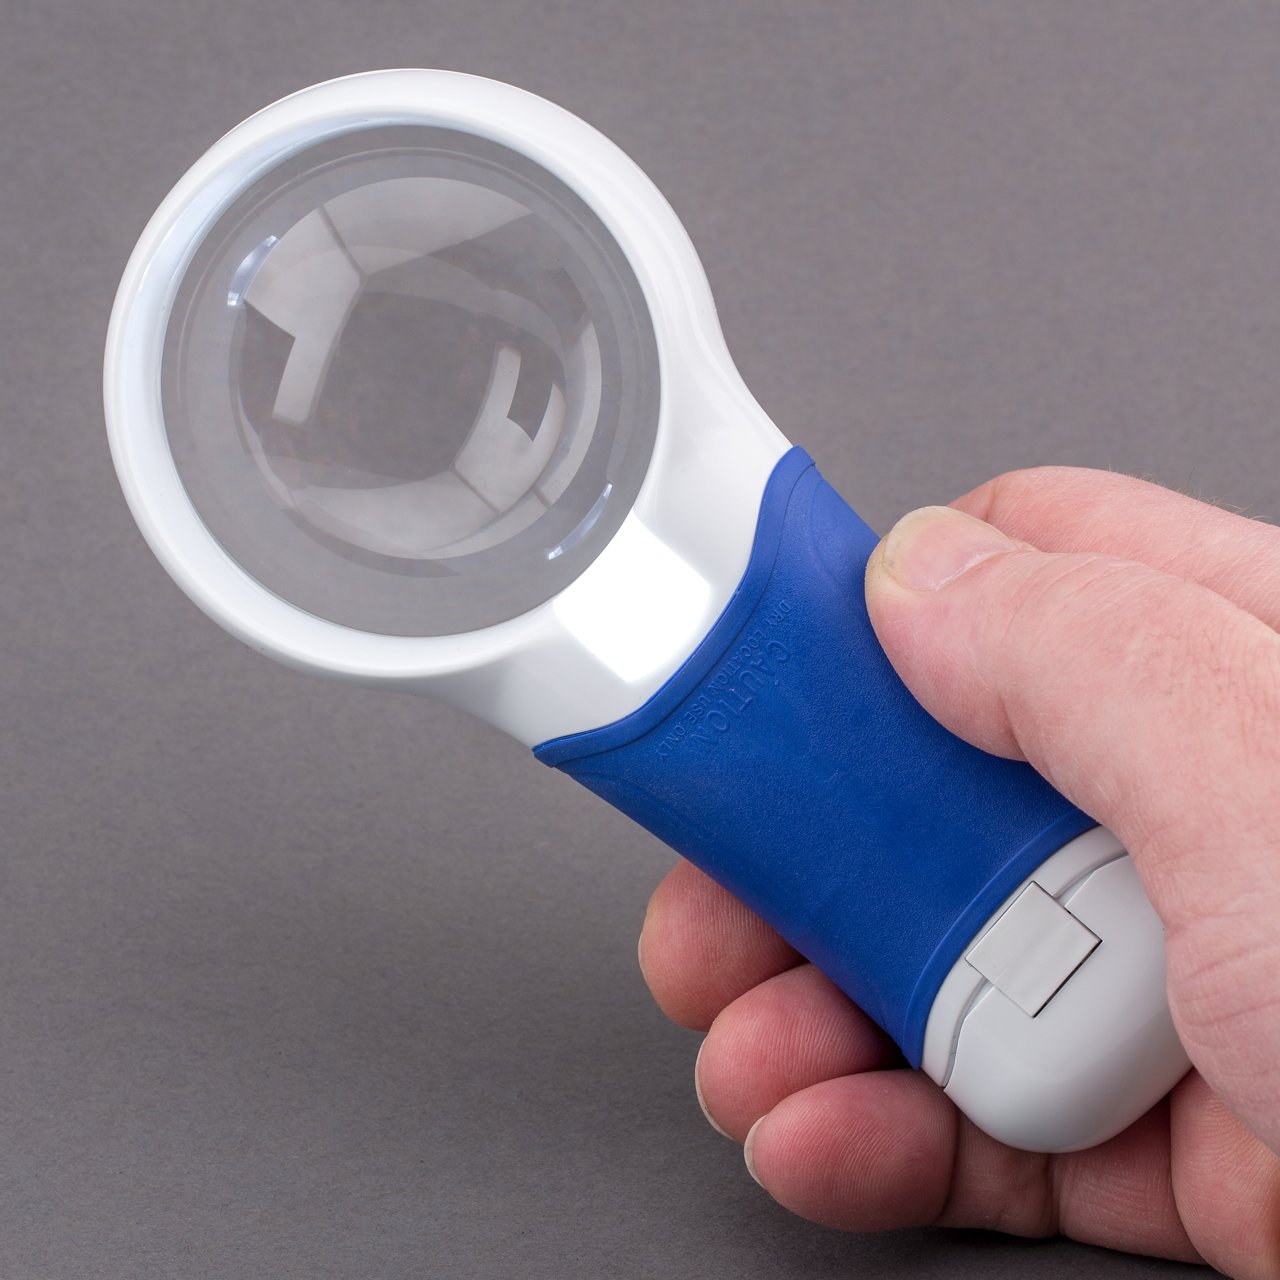 Coil Atmax LED Illuminated Hand-held Magnifier